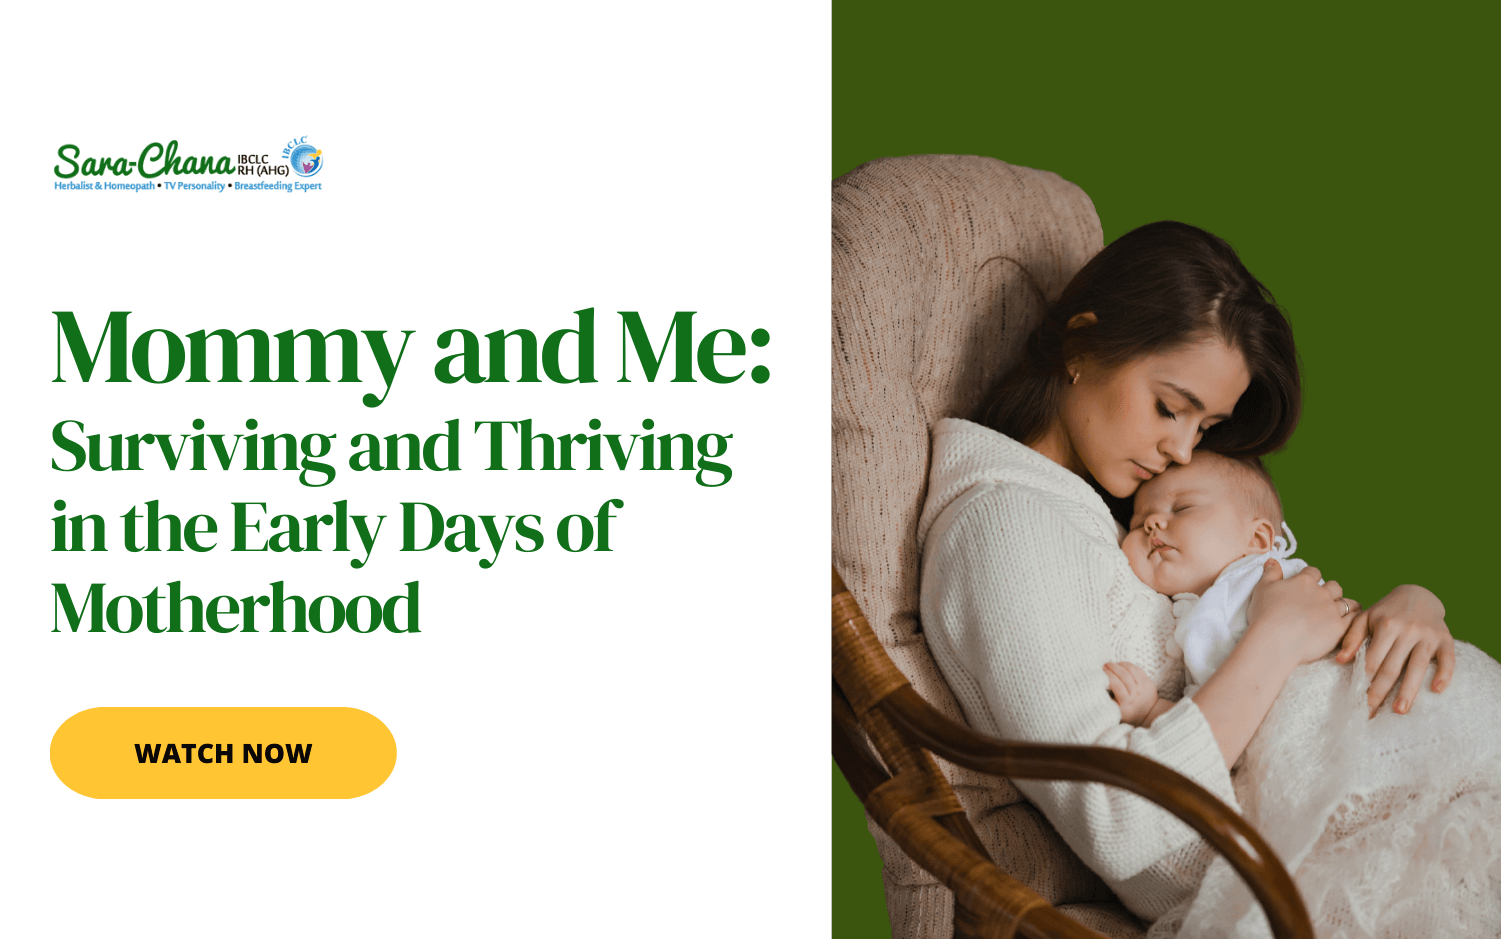 Mommy and Me: Surviving and Thriving in the Early Days of Motherhood